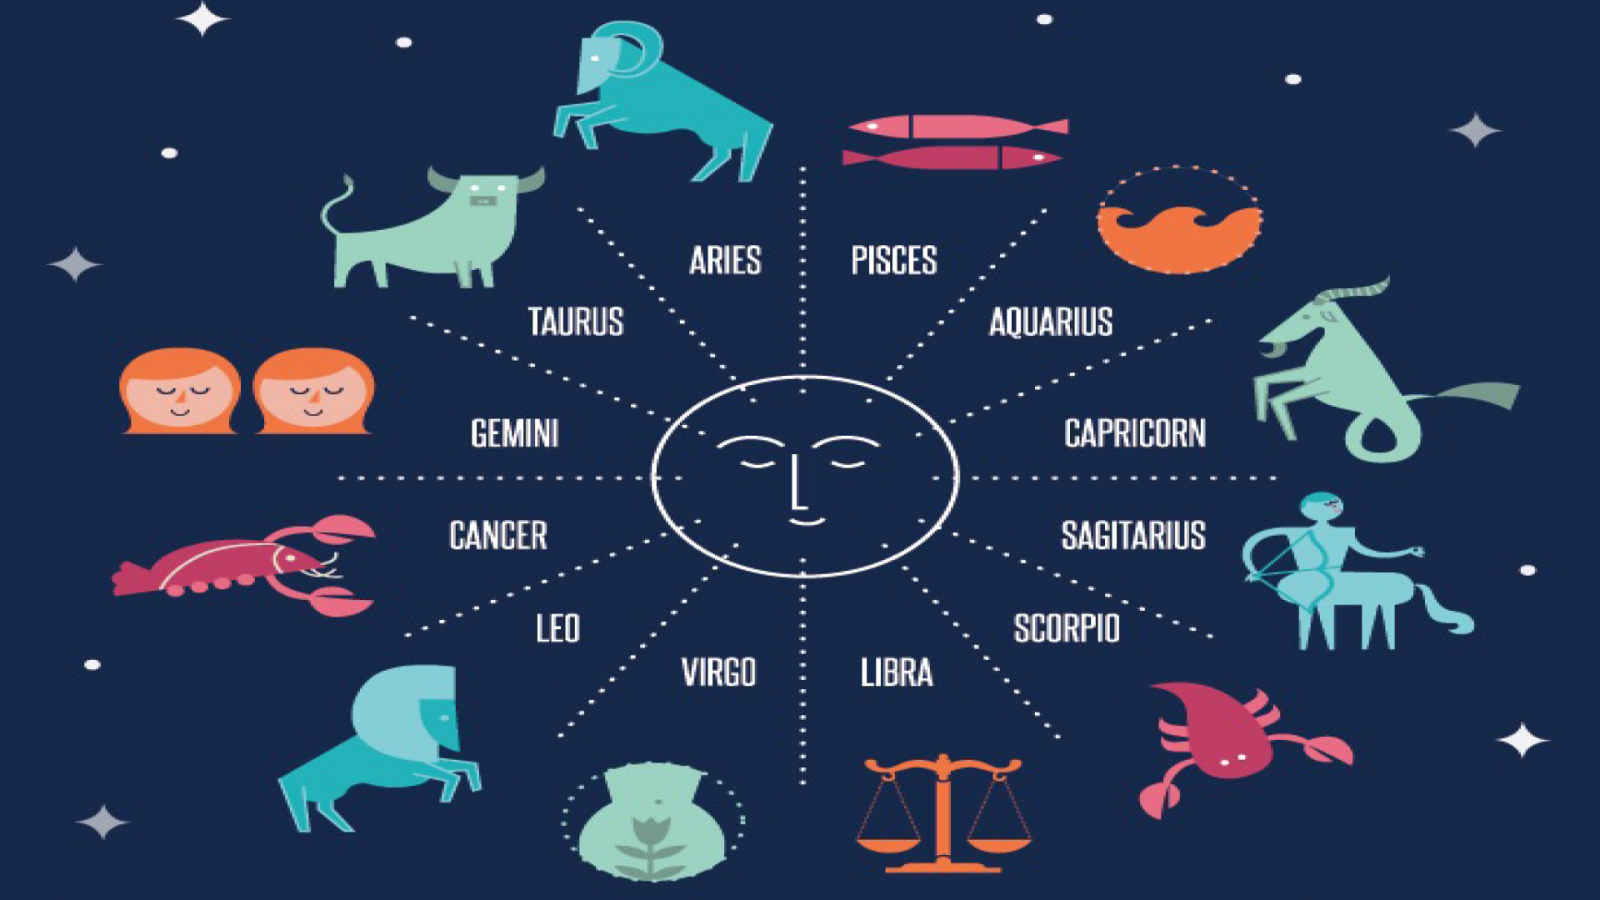 What Animal Am I? star signs